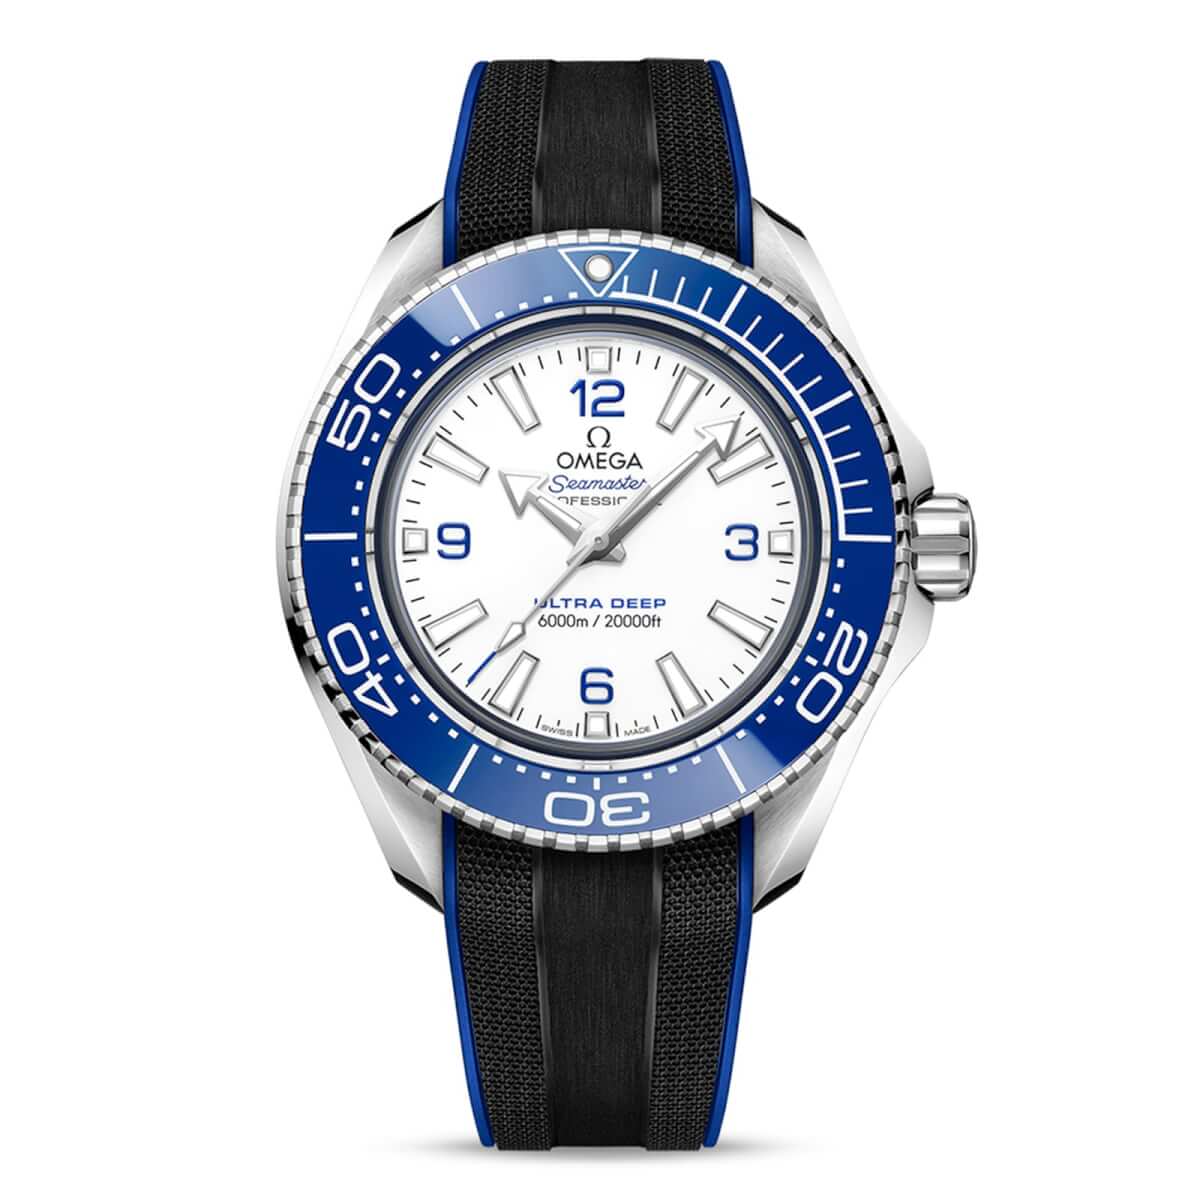 Seamaster Planet Ocean Ultra Deep 6000m Co-Axial Master Chronometer 45.5mm Mens Watch White